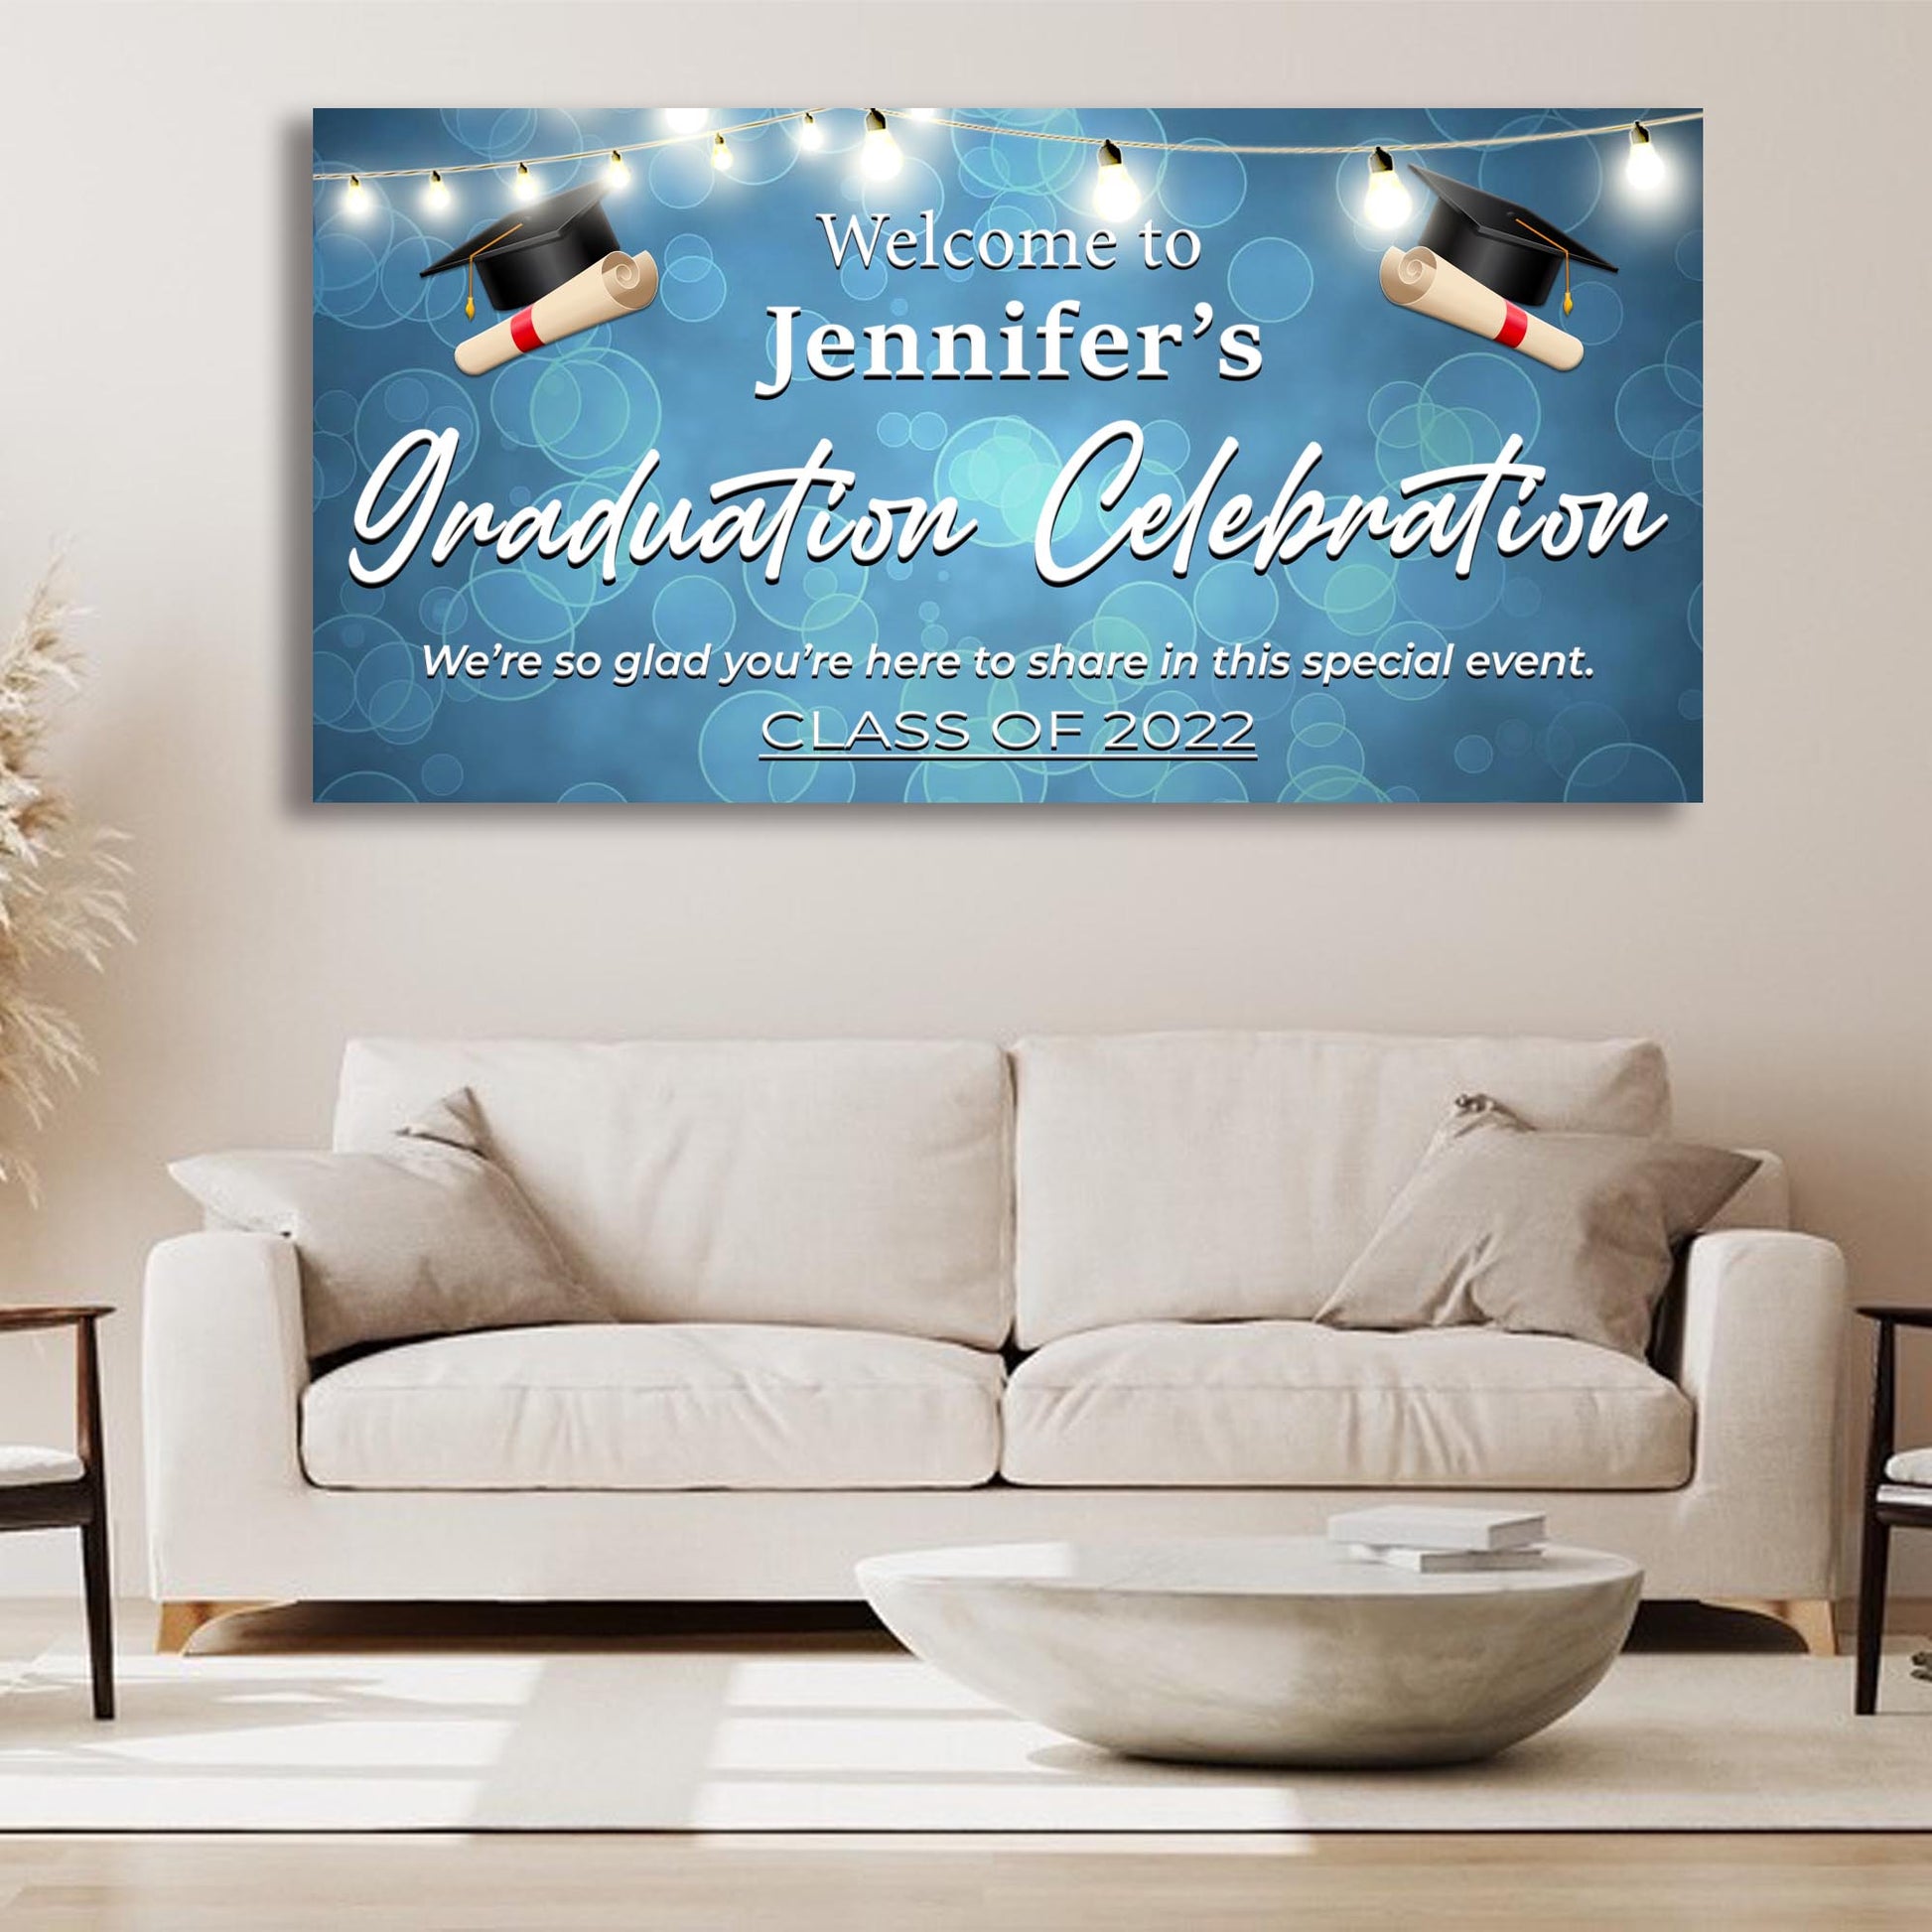 Graduation Celebration Welcome Sign - Image by Tailored Canvases